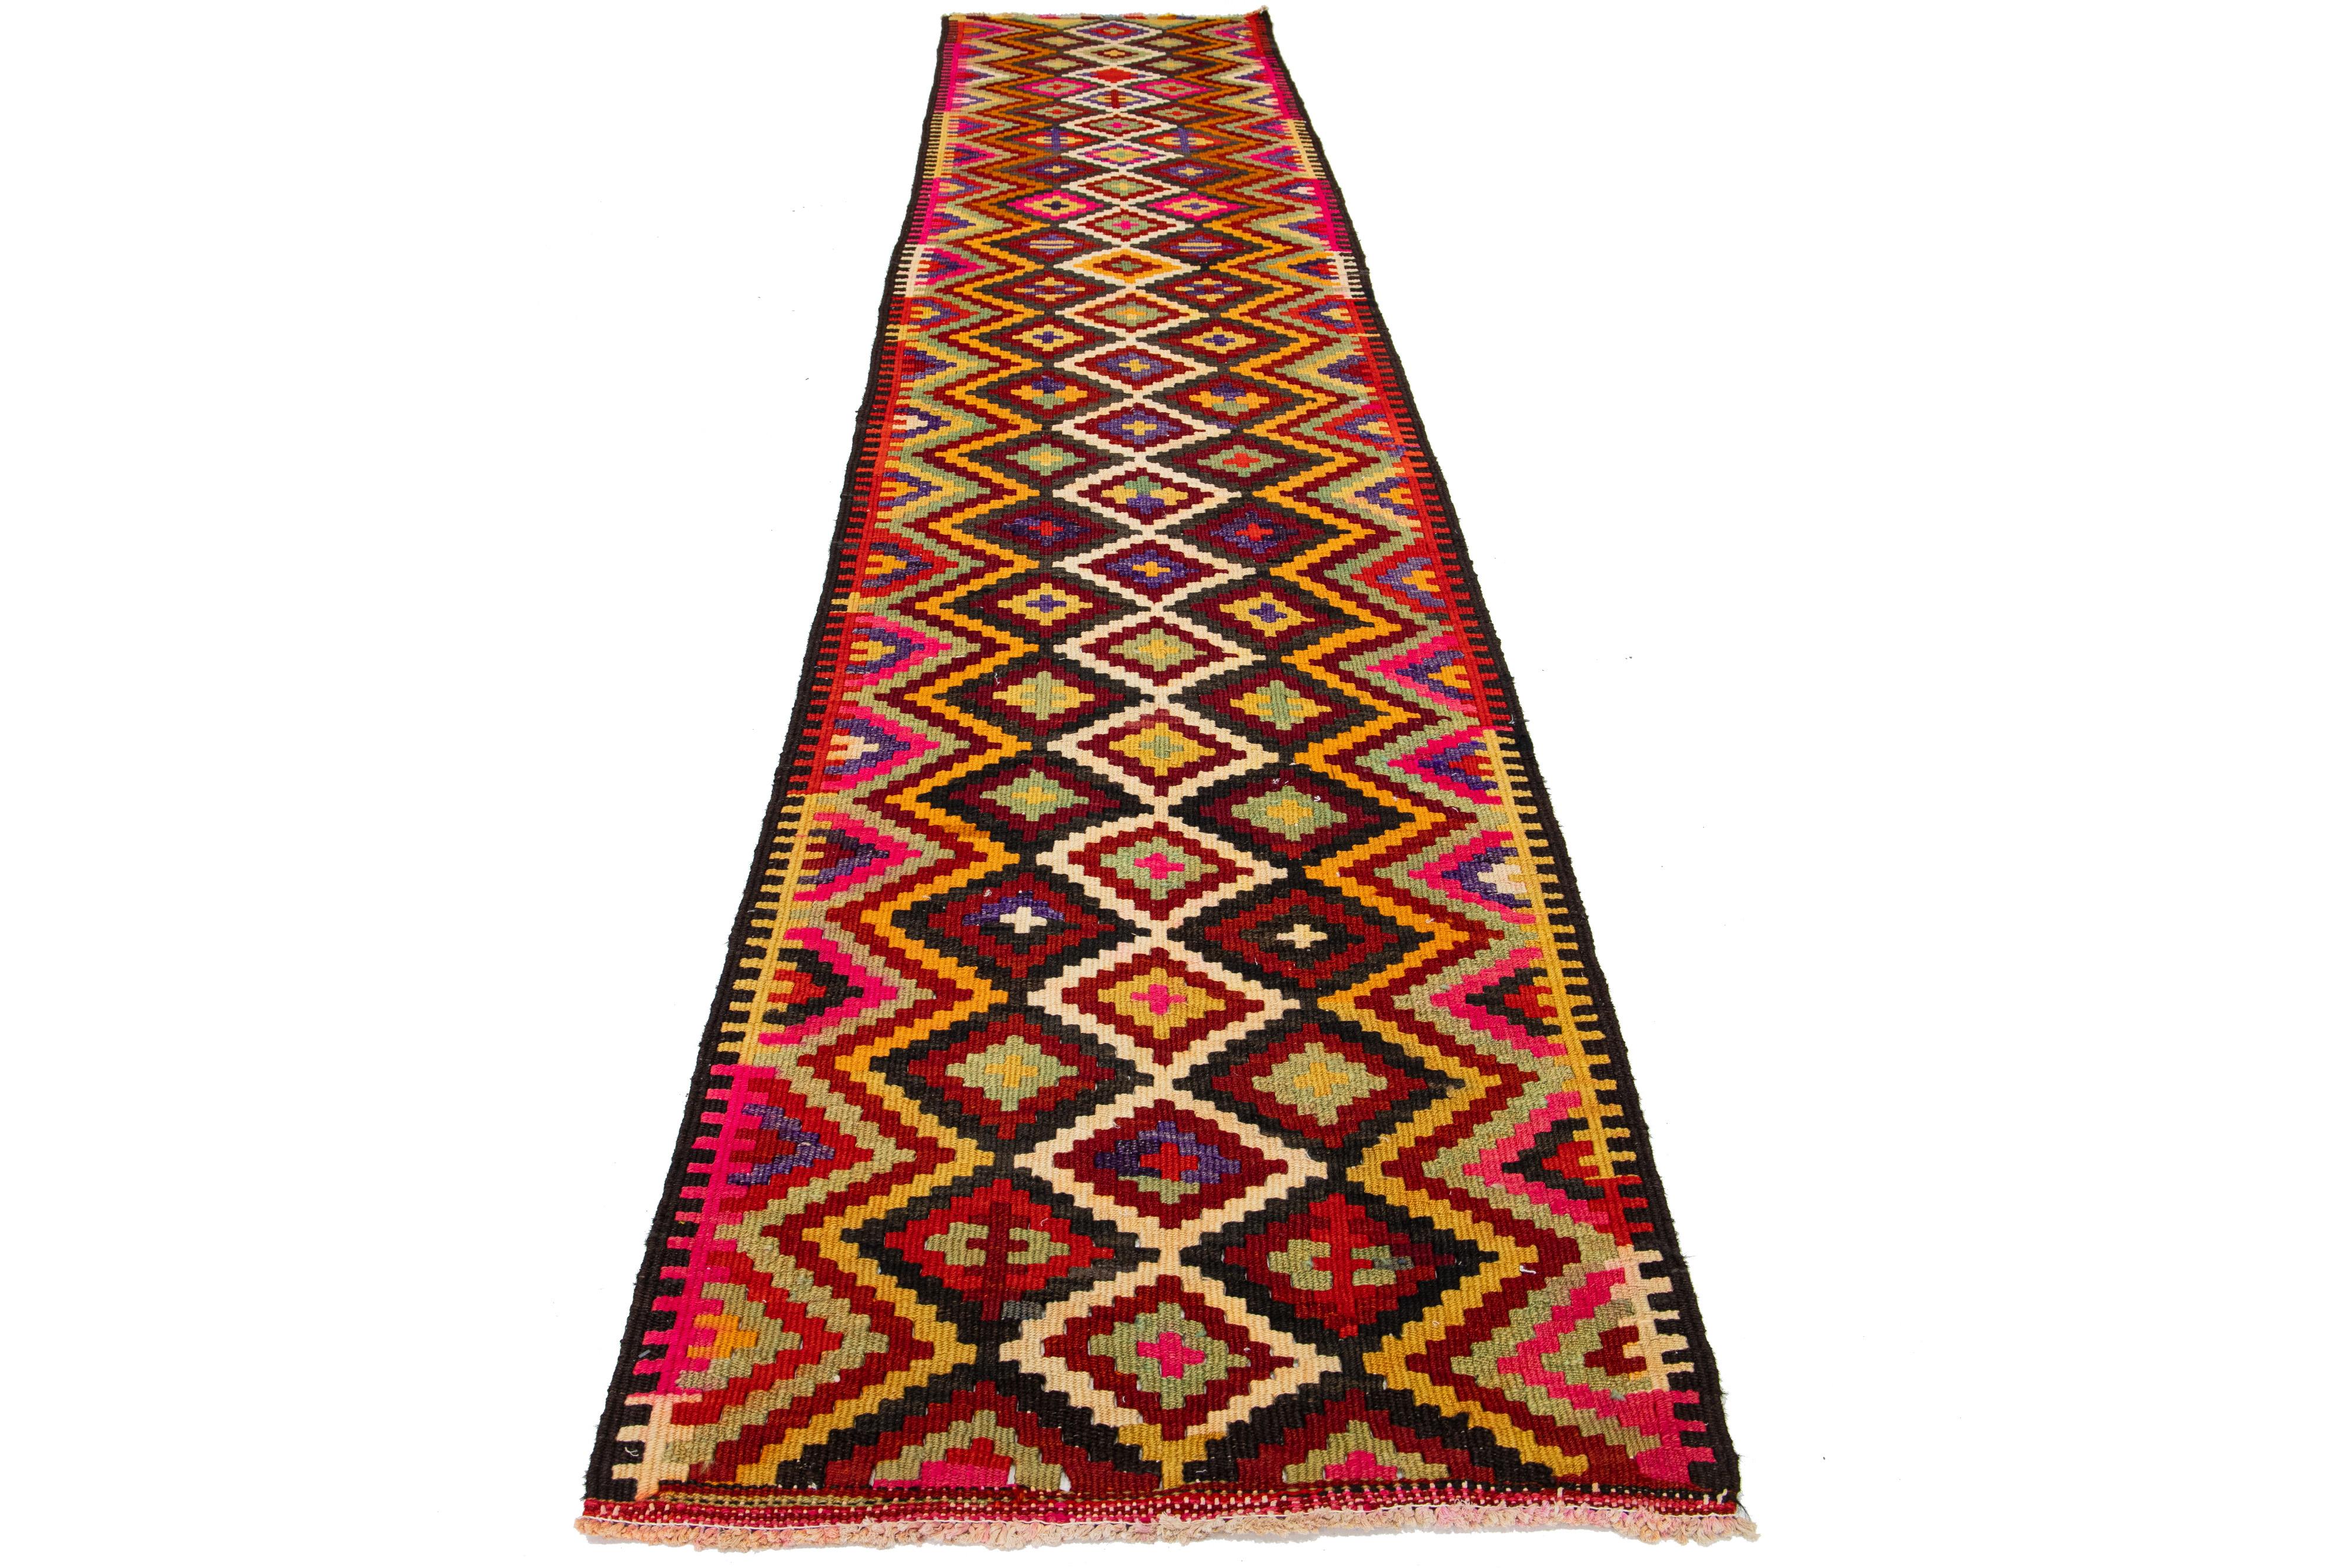 This is a handmade wool flatweave kilim rug with a multi-colored field. The rug boasts an all-over geometric design that adds to its aesthetic appeal.

This rug measures 2'11